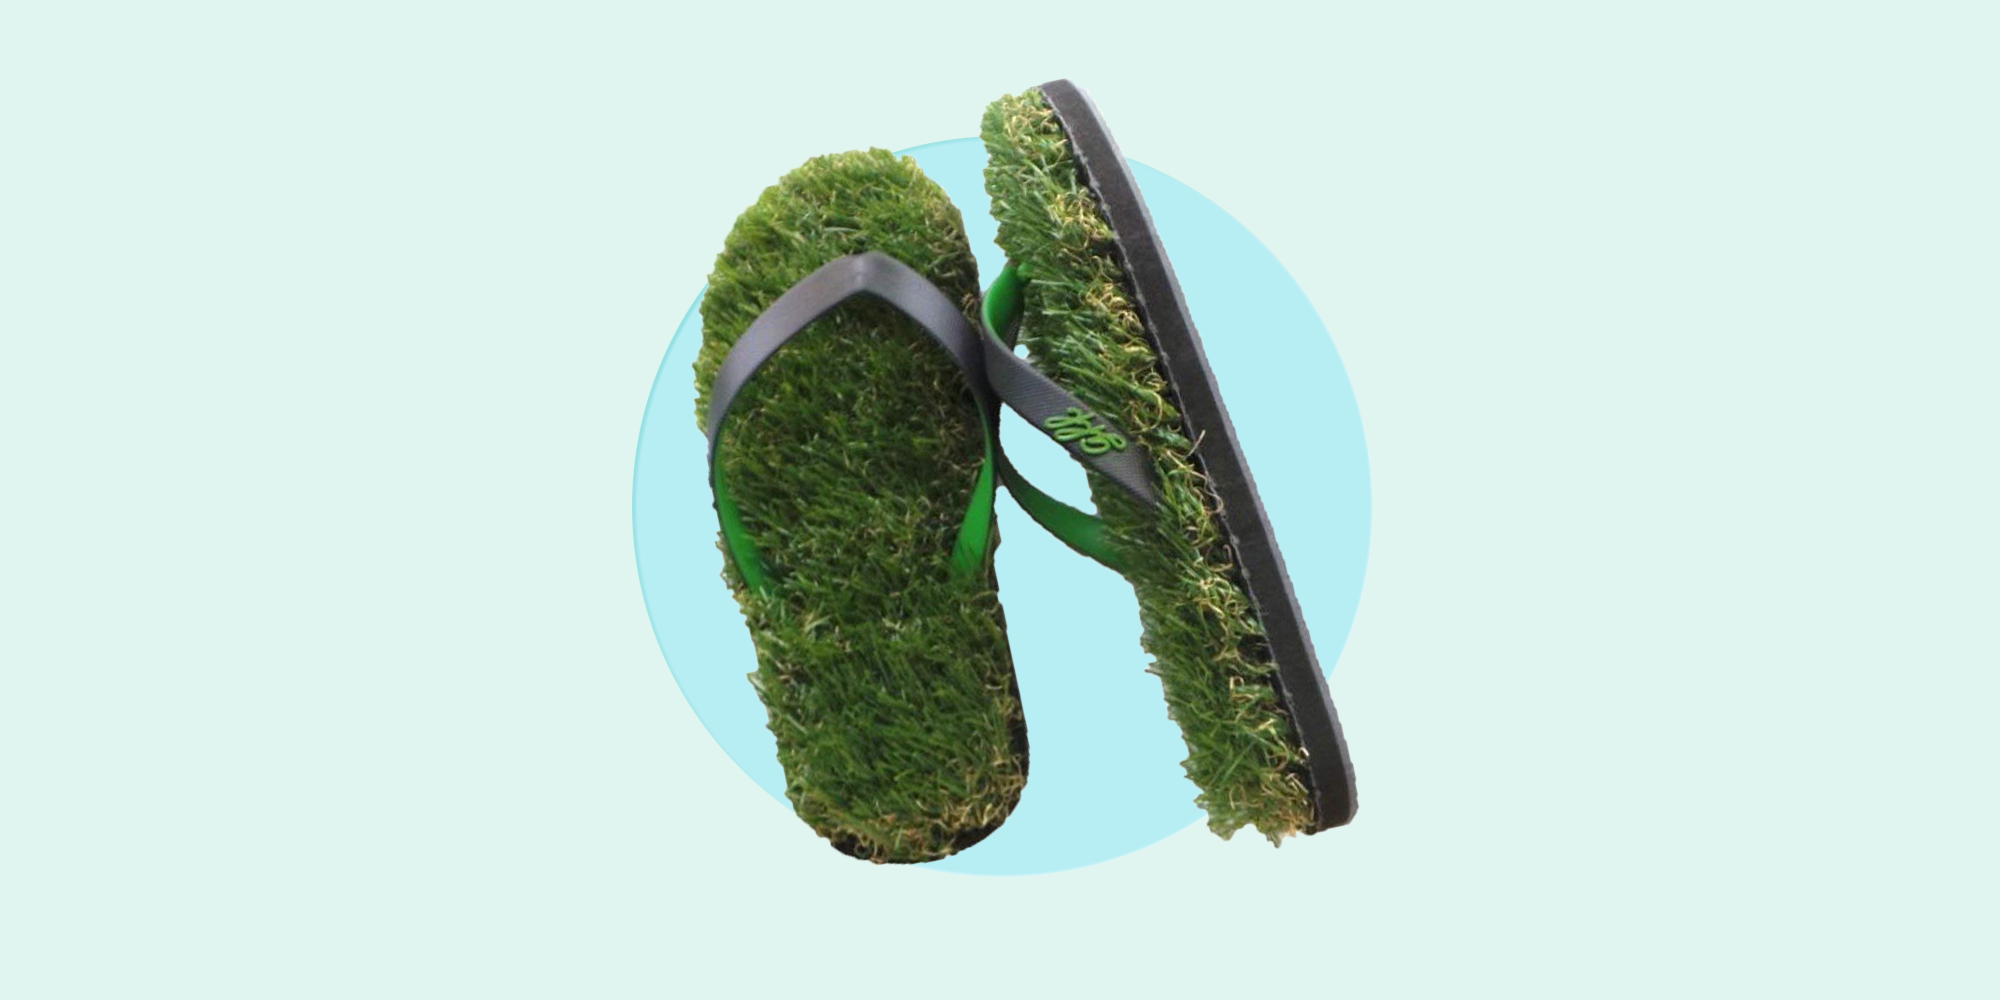 These $20 Grass Flip Flops Are the 